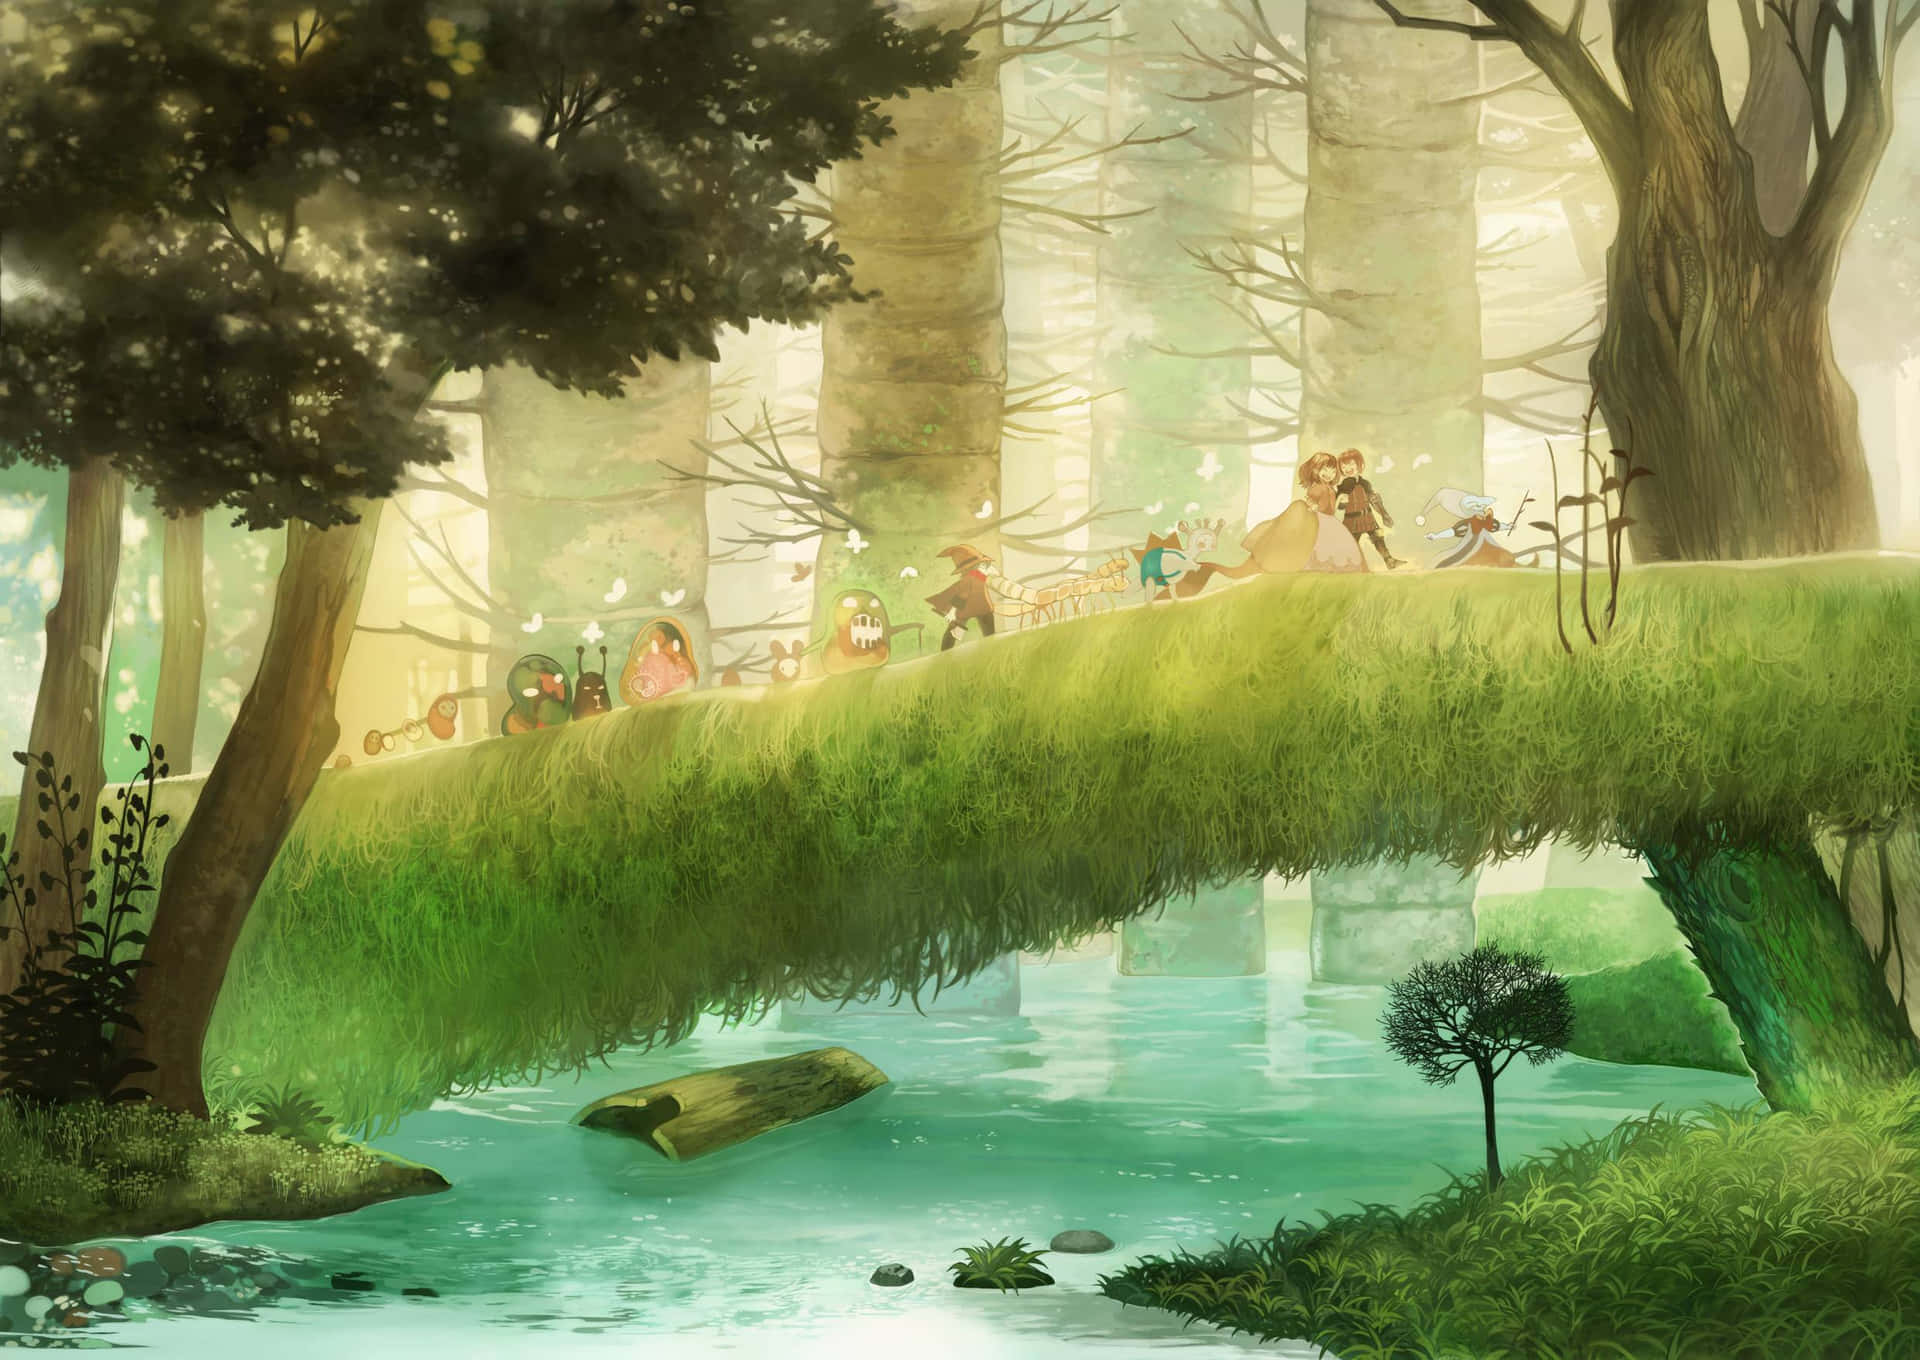 Forest background by Chantalwut on DeviantArt